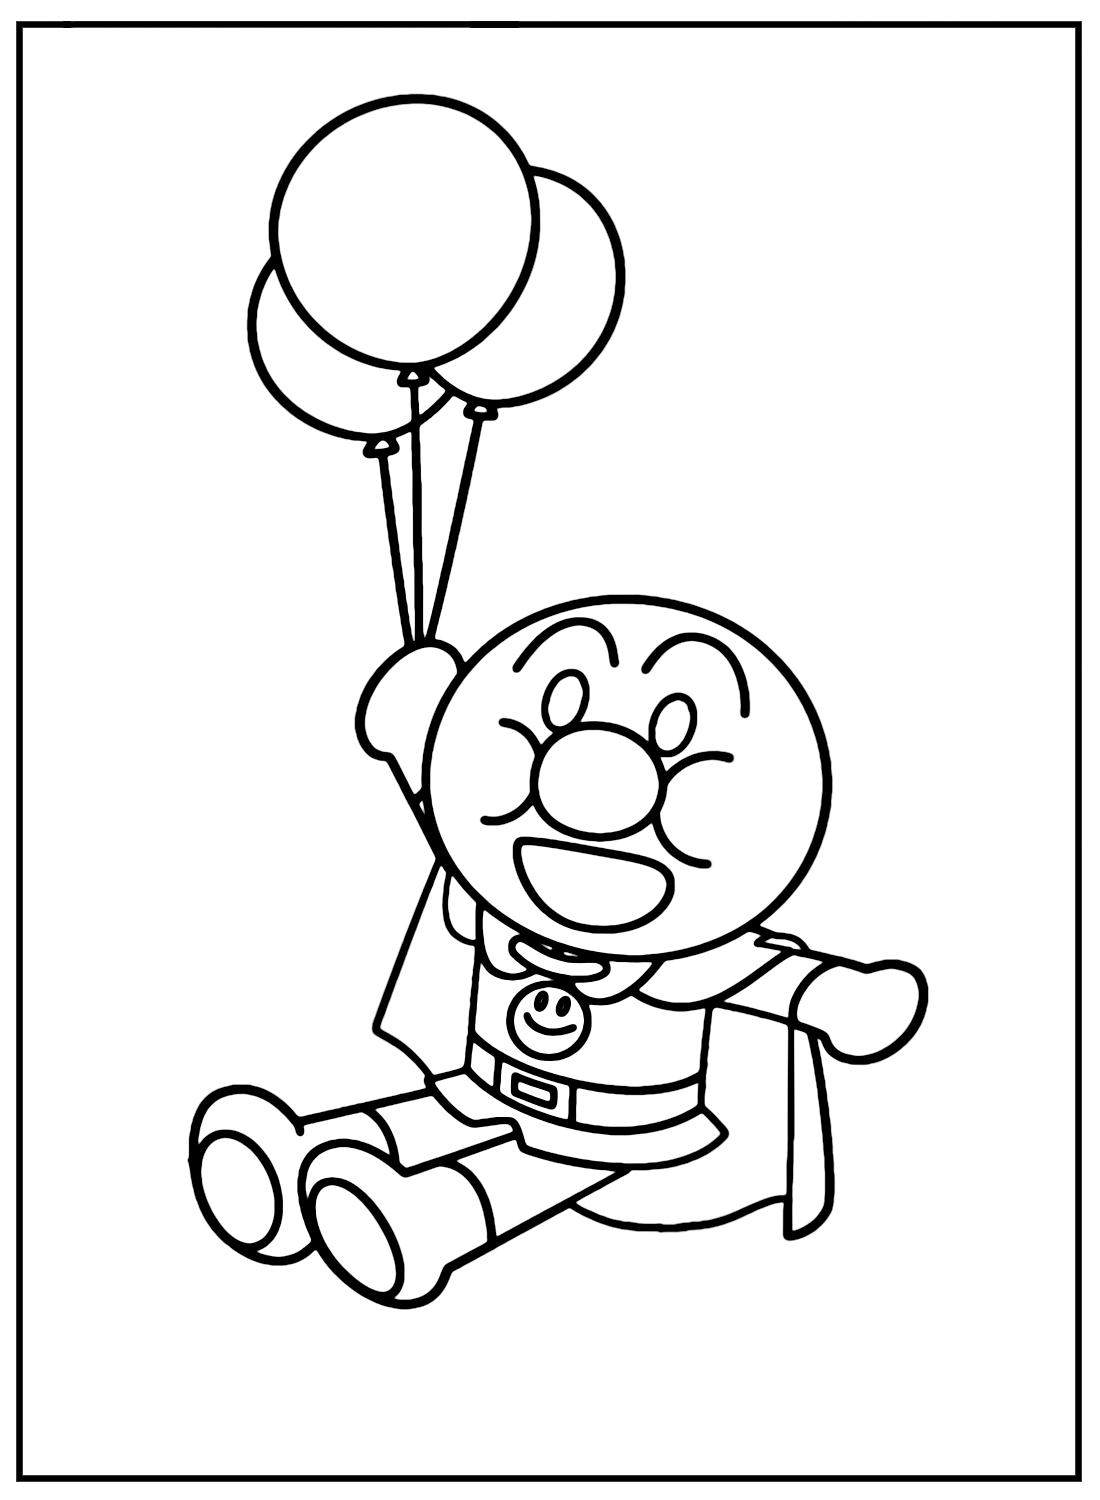 Balloons with Anpanman Coloring Page